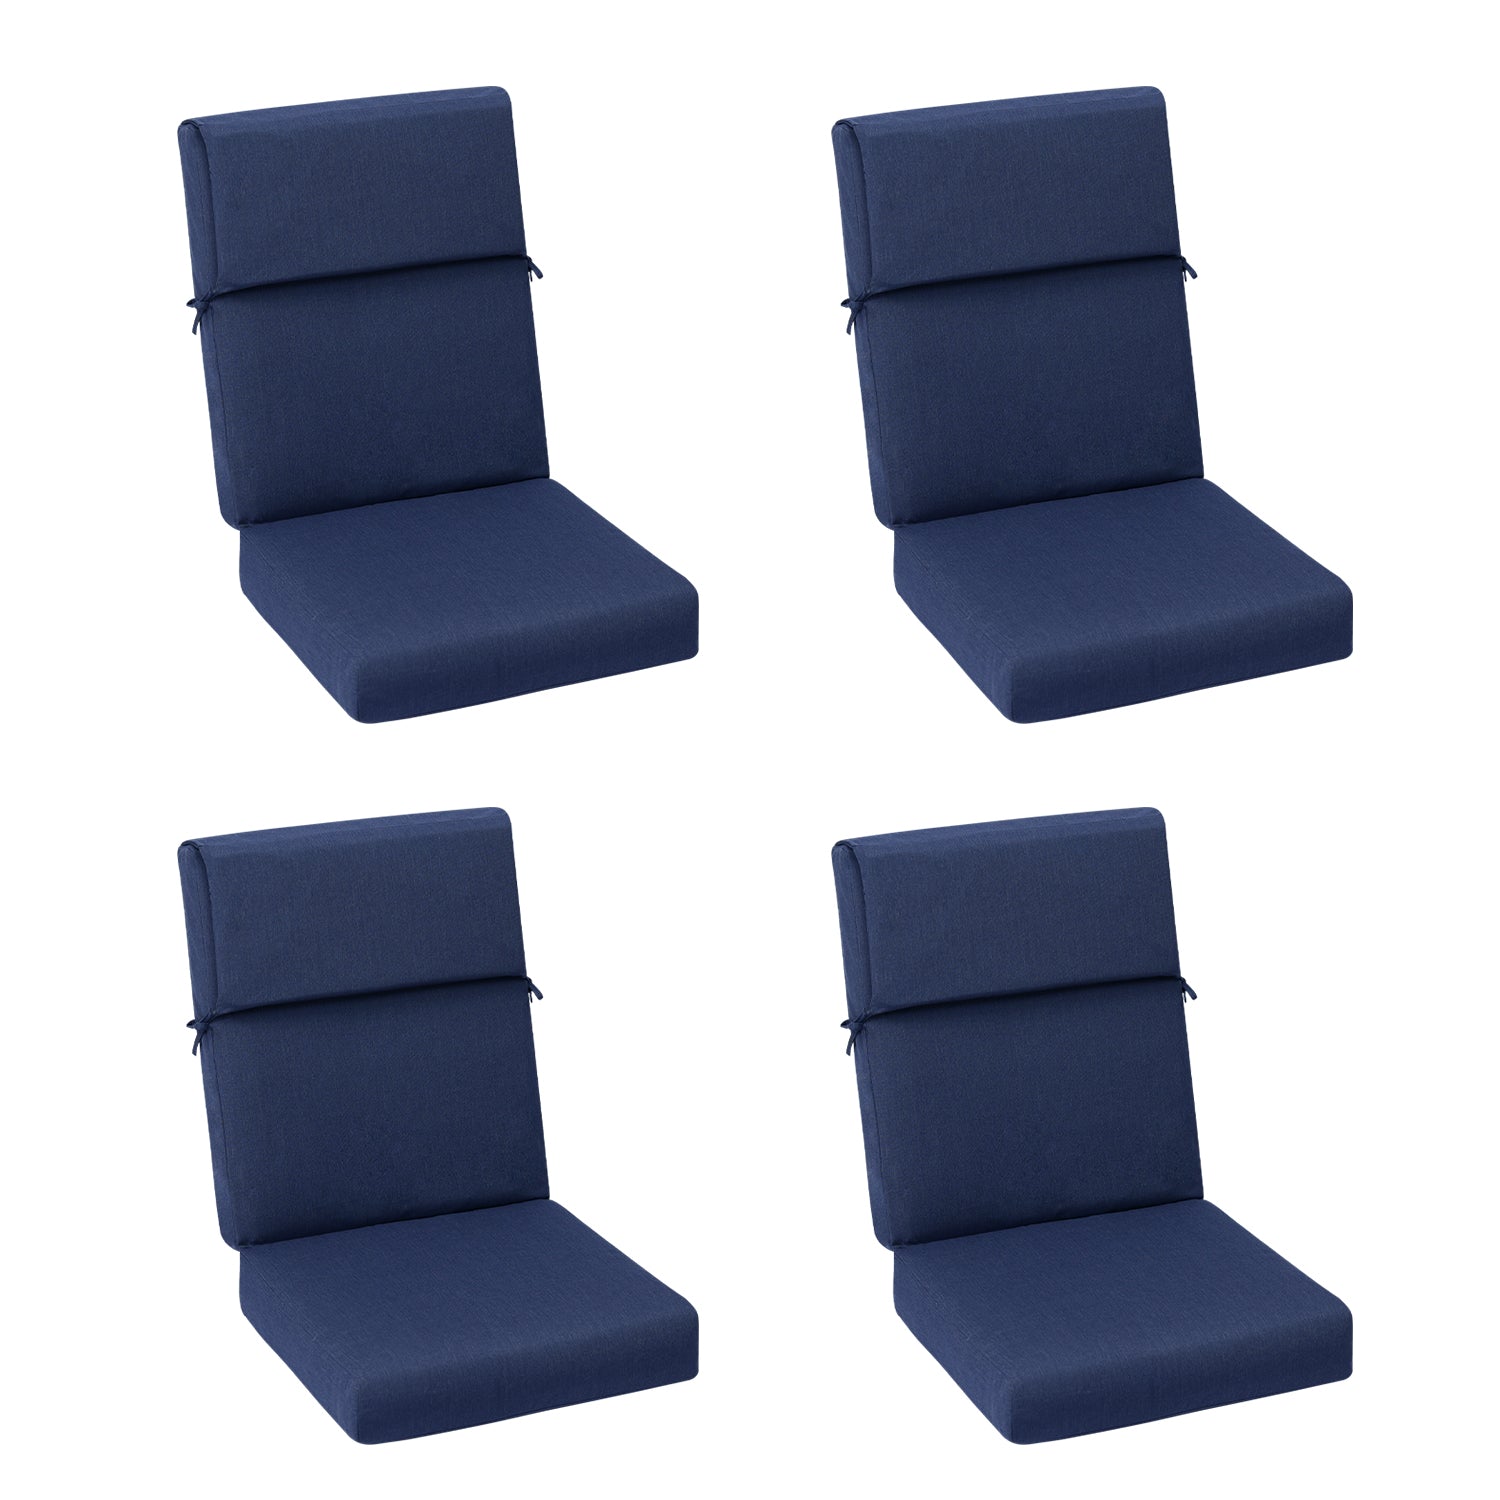 High Back Chair Cushions Set of 4, UV-Protected & Water-Resistant, 46x21x4 Inches CUSHION Aoodor Dark blue  